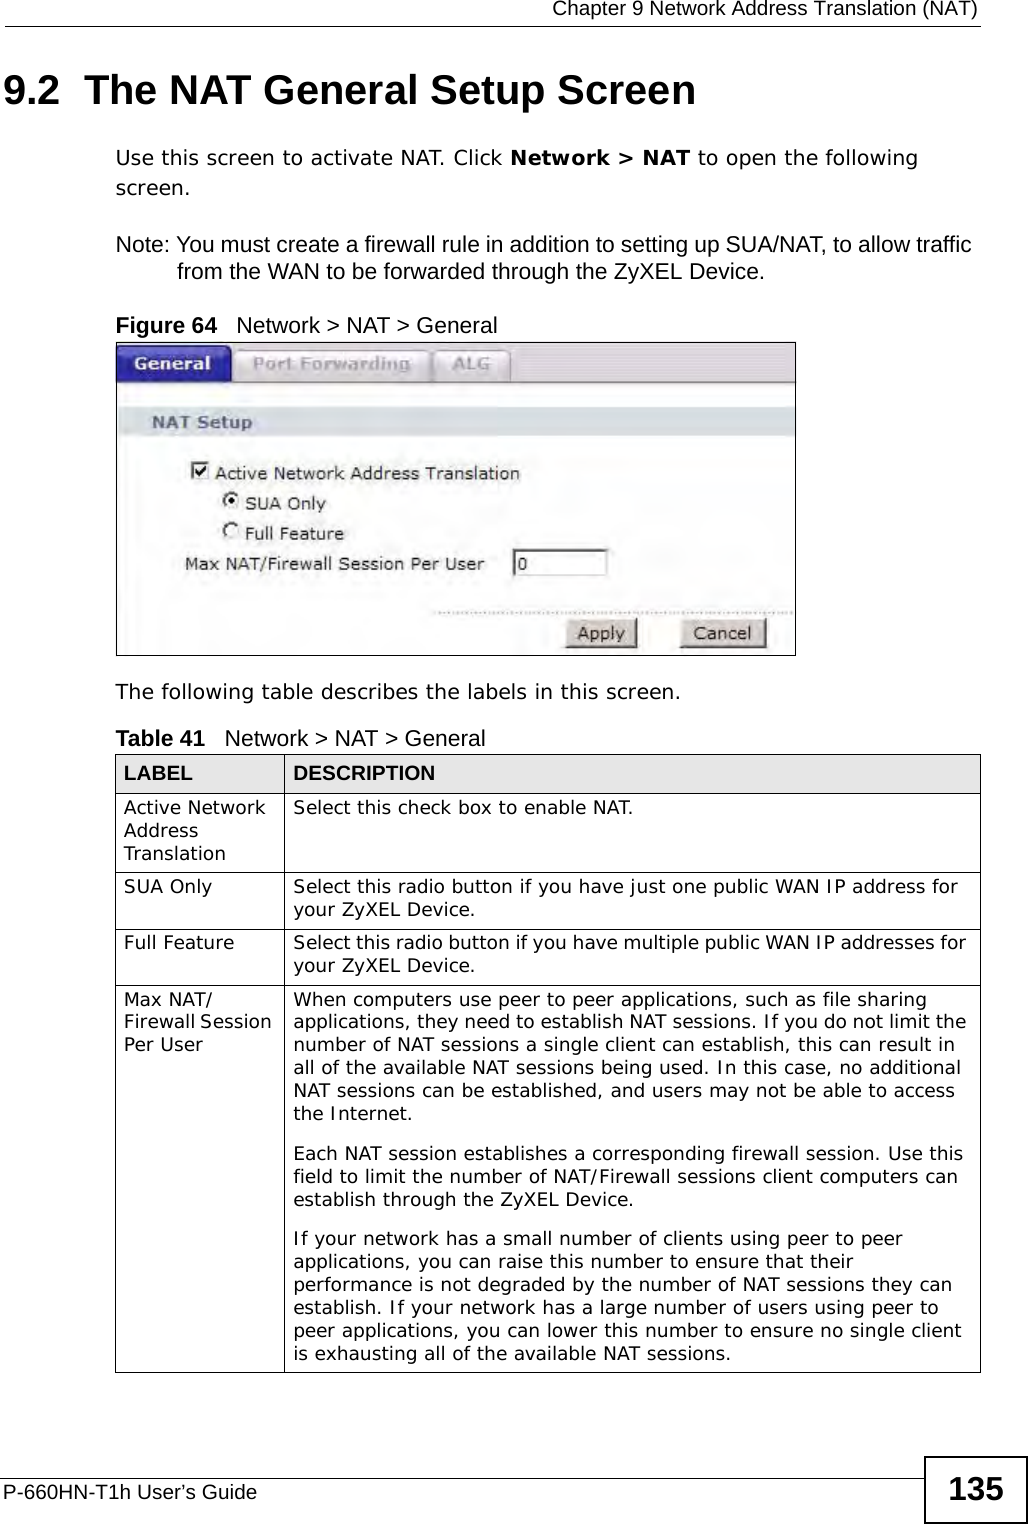  Chapter 9 Network Address Translation (NAT)P-660HN-T1h User’s Guide 1359.2  The NAT General Setup ScreenUse this screen to activate NAT. Click Network &gt; NAT to open the following screen.Note: You must create a firewall rule in addition to setting up SUA/NAT, to allow traffic from the WAN to be forwarded through the ZyXEL Device.Figure 64   Network &gt; NAT &gt; GeneralThe following table describes the labels in this screen.Table 41   Network &gt; NAT &gt; GeneralLABEL DESCRIPTIONActive Network Address Translation Select this check box to enable NAT.SUA Only Select this radio button if you have just one public WAN IP address for your ZyXEL Device.Full Feature  Select this radio button if you have multiple public WAN IP addresses for your ZyXEL Device.Max NAT/Firewall Session Per UserWhen computers use peer to peer applications, such as file sharing applications, they need to establish NAT sessions. If you do not limit the number of NAT sessions a single client can establish, this can result in all of the available NAT sessions being used. In this case, no additional NAT sessions can be established, and users may not be able to access the Internet.Each NAT session establishes a corresponding firewall session. Use this field to limit the number of NAT/Firewall sessions client computers can establish through the ZyXEL Device.If your network has a small number of clients using peer to peer applications, you can raise this number to ensure that their performance is not degraded by the number of NAT sessions they can establish. If your network has a large number of users using peer to peer applications, you can lower this number to ensure no single client is exhausting all of the available NAT sessions.